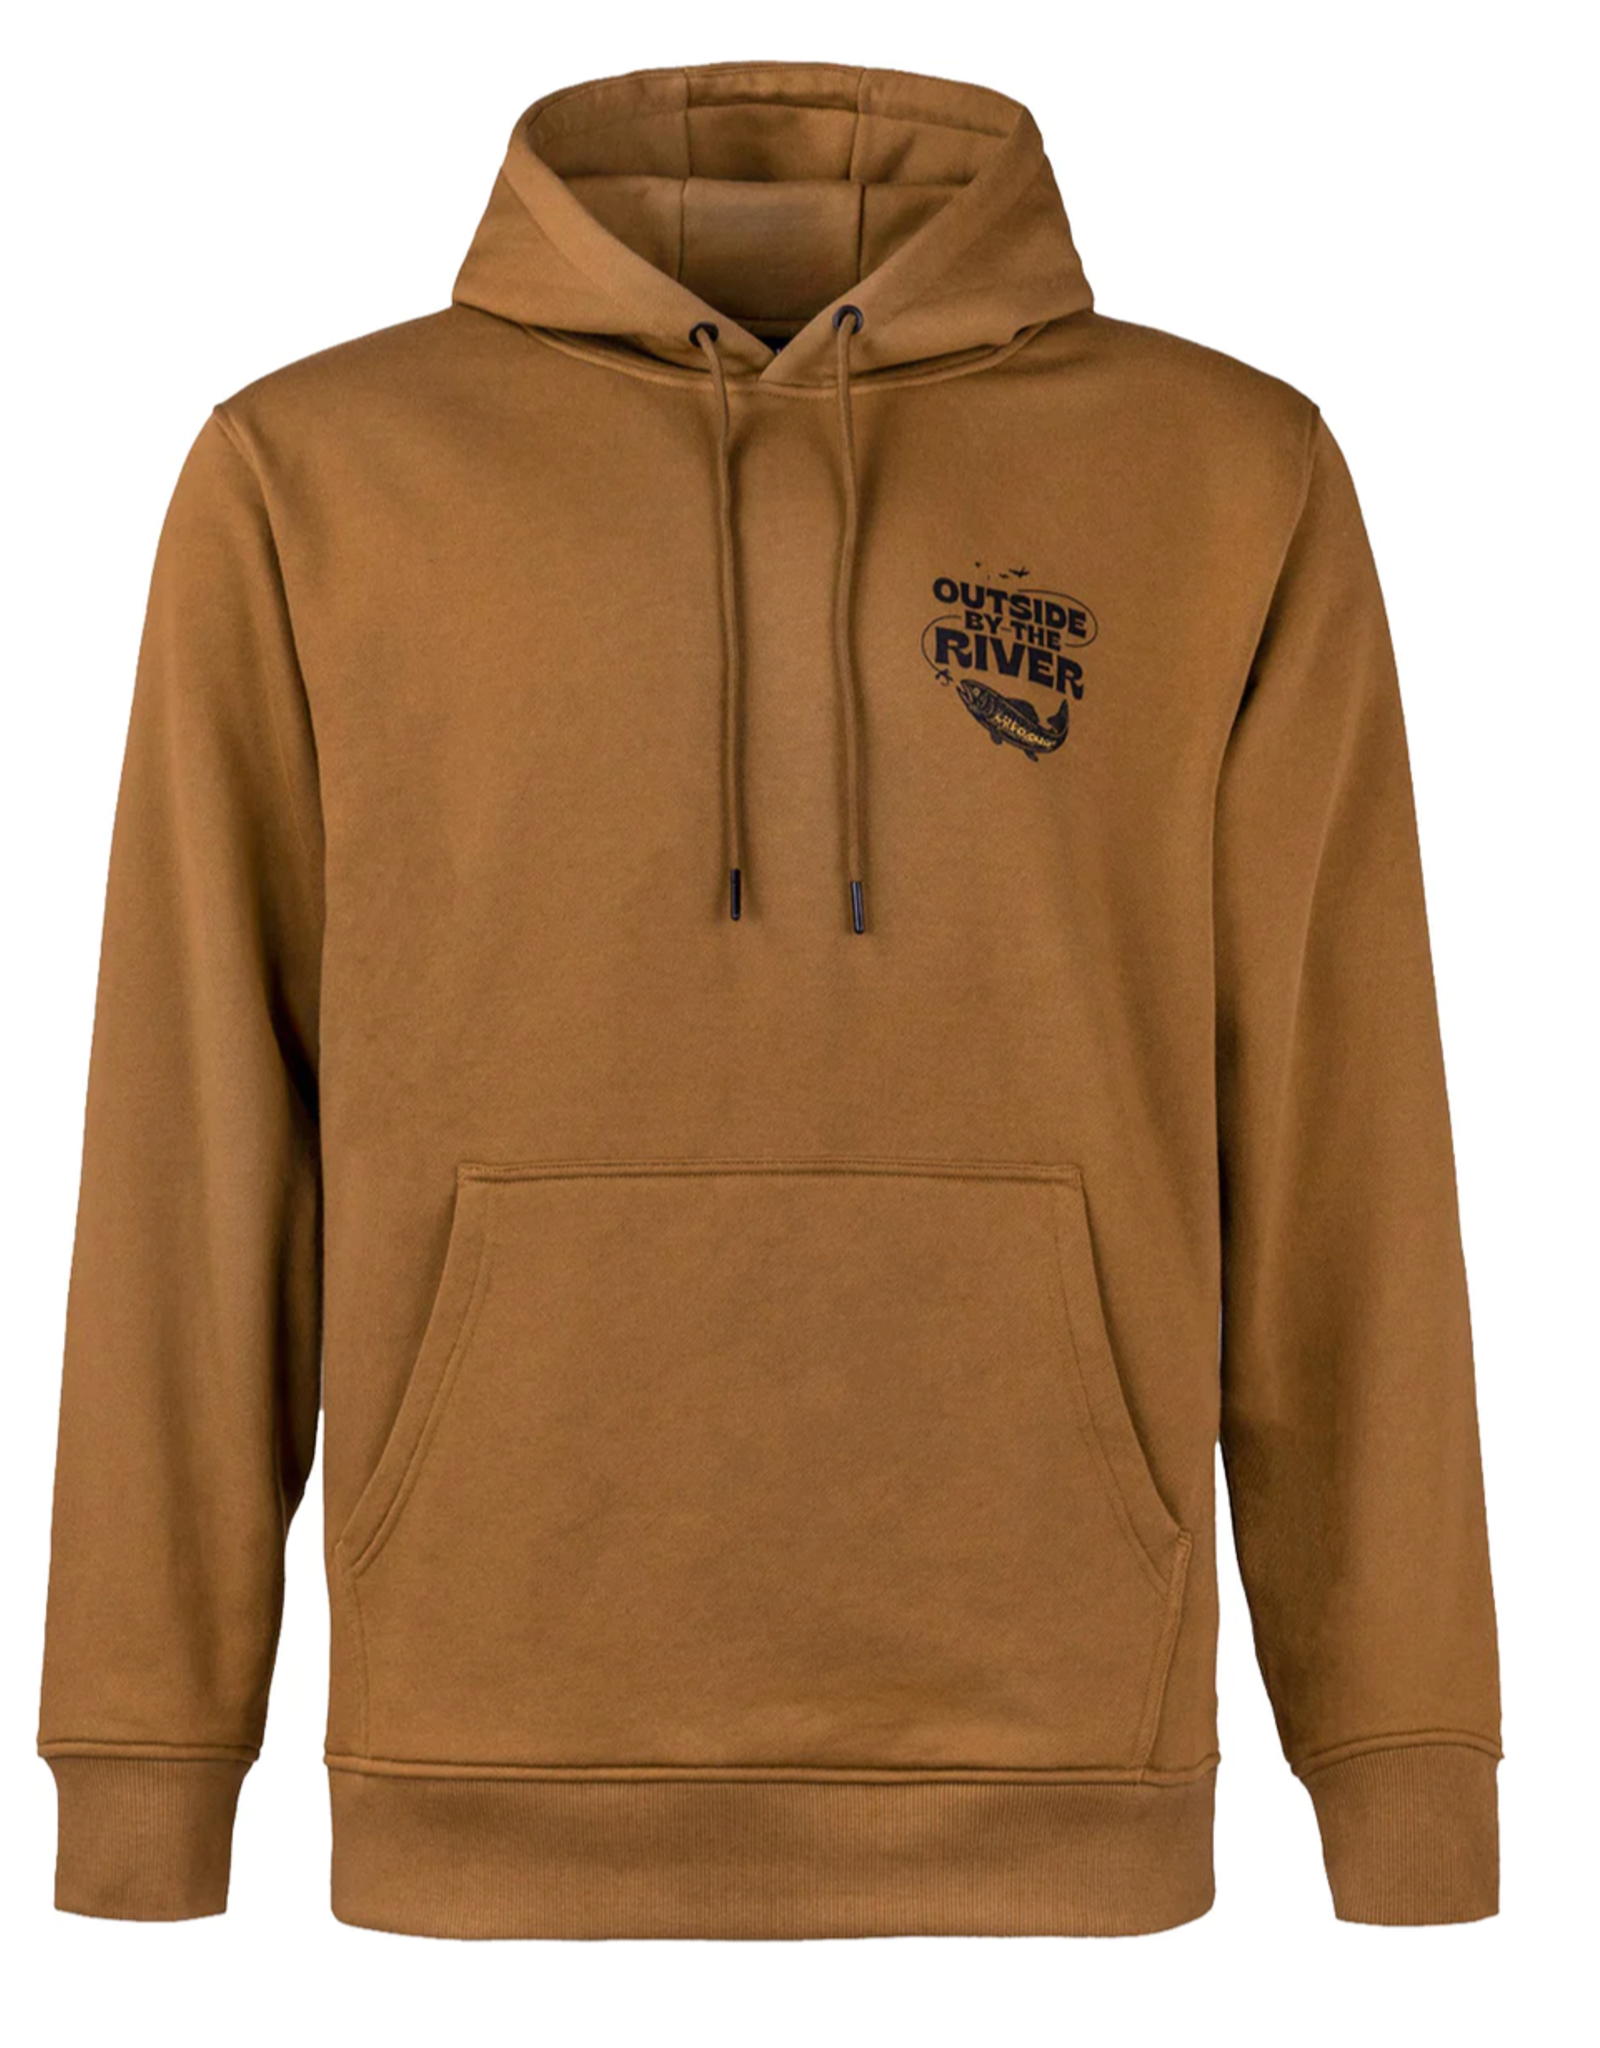 Hooké Hooké Outside by the River Hoodie - Golden Brown